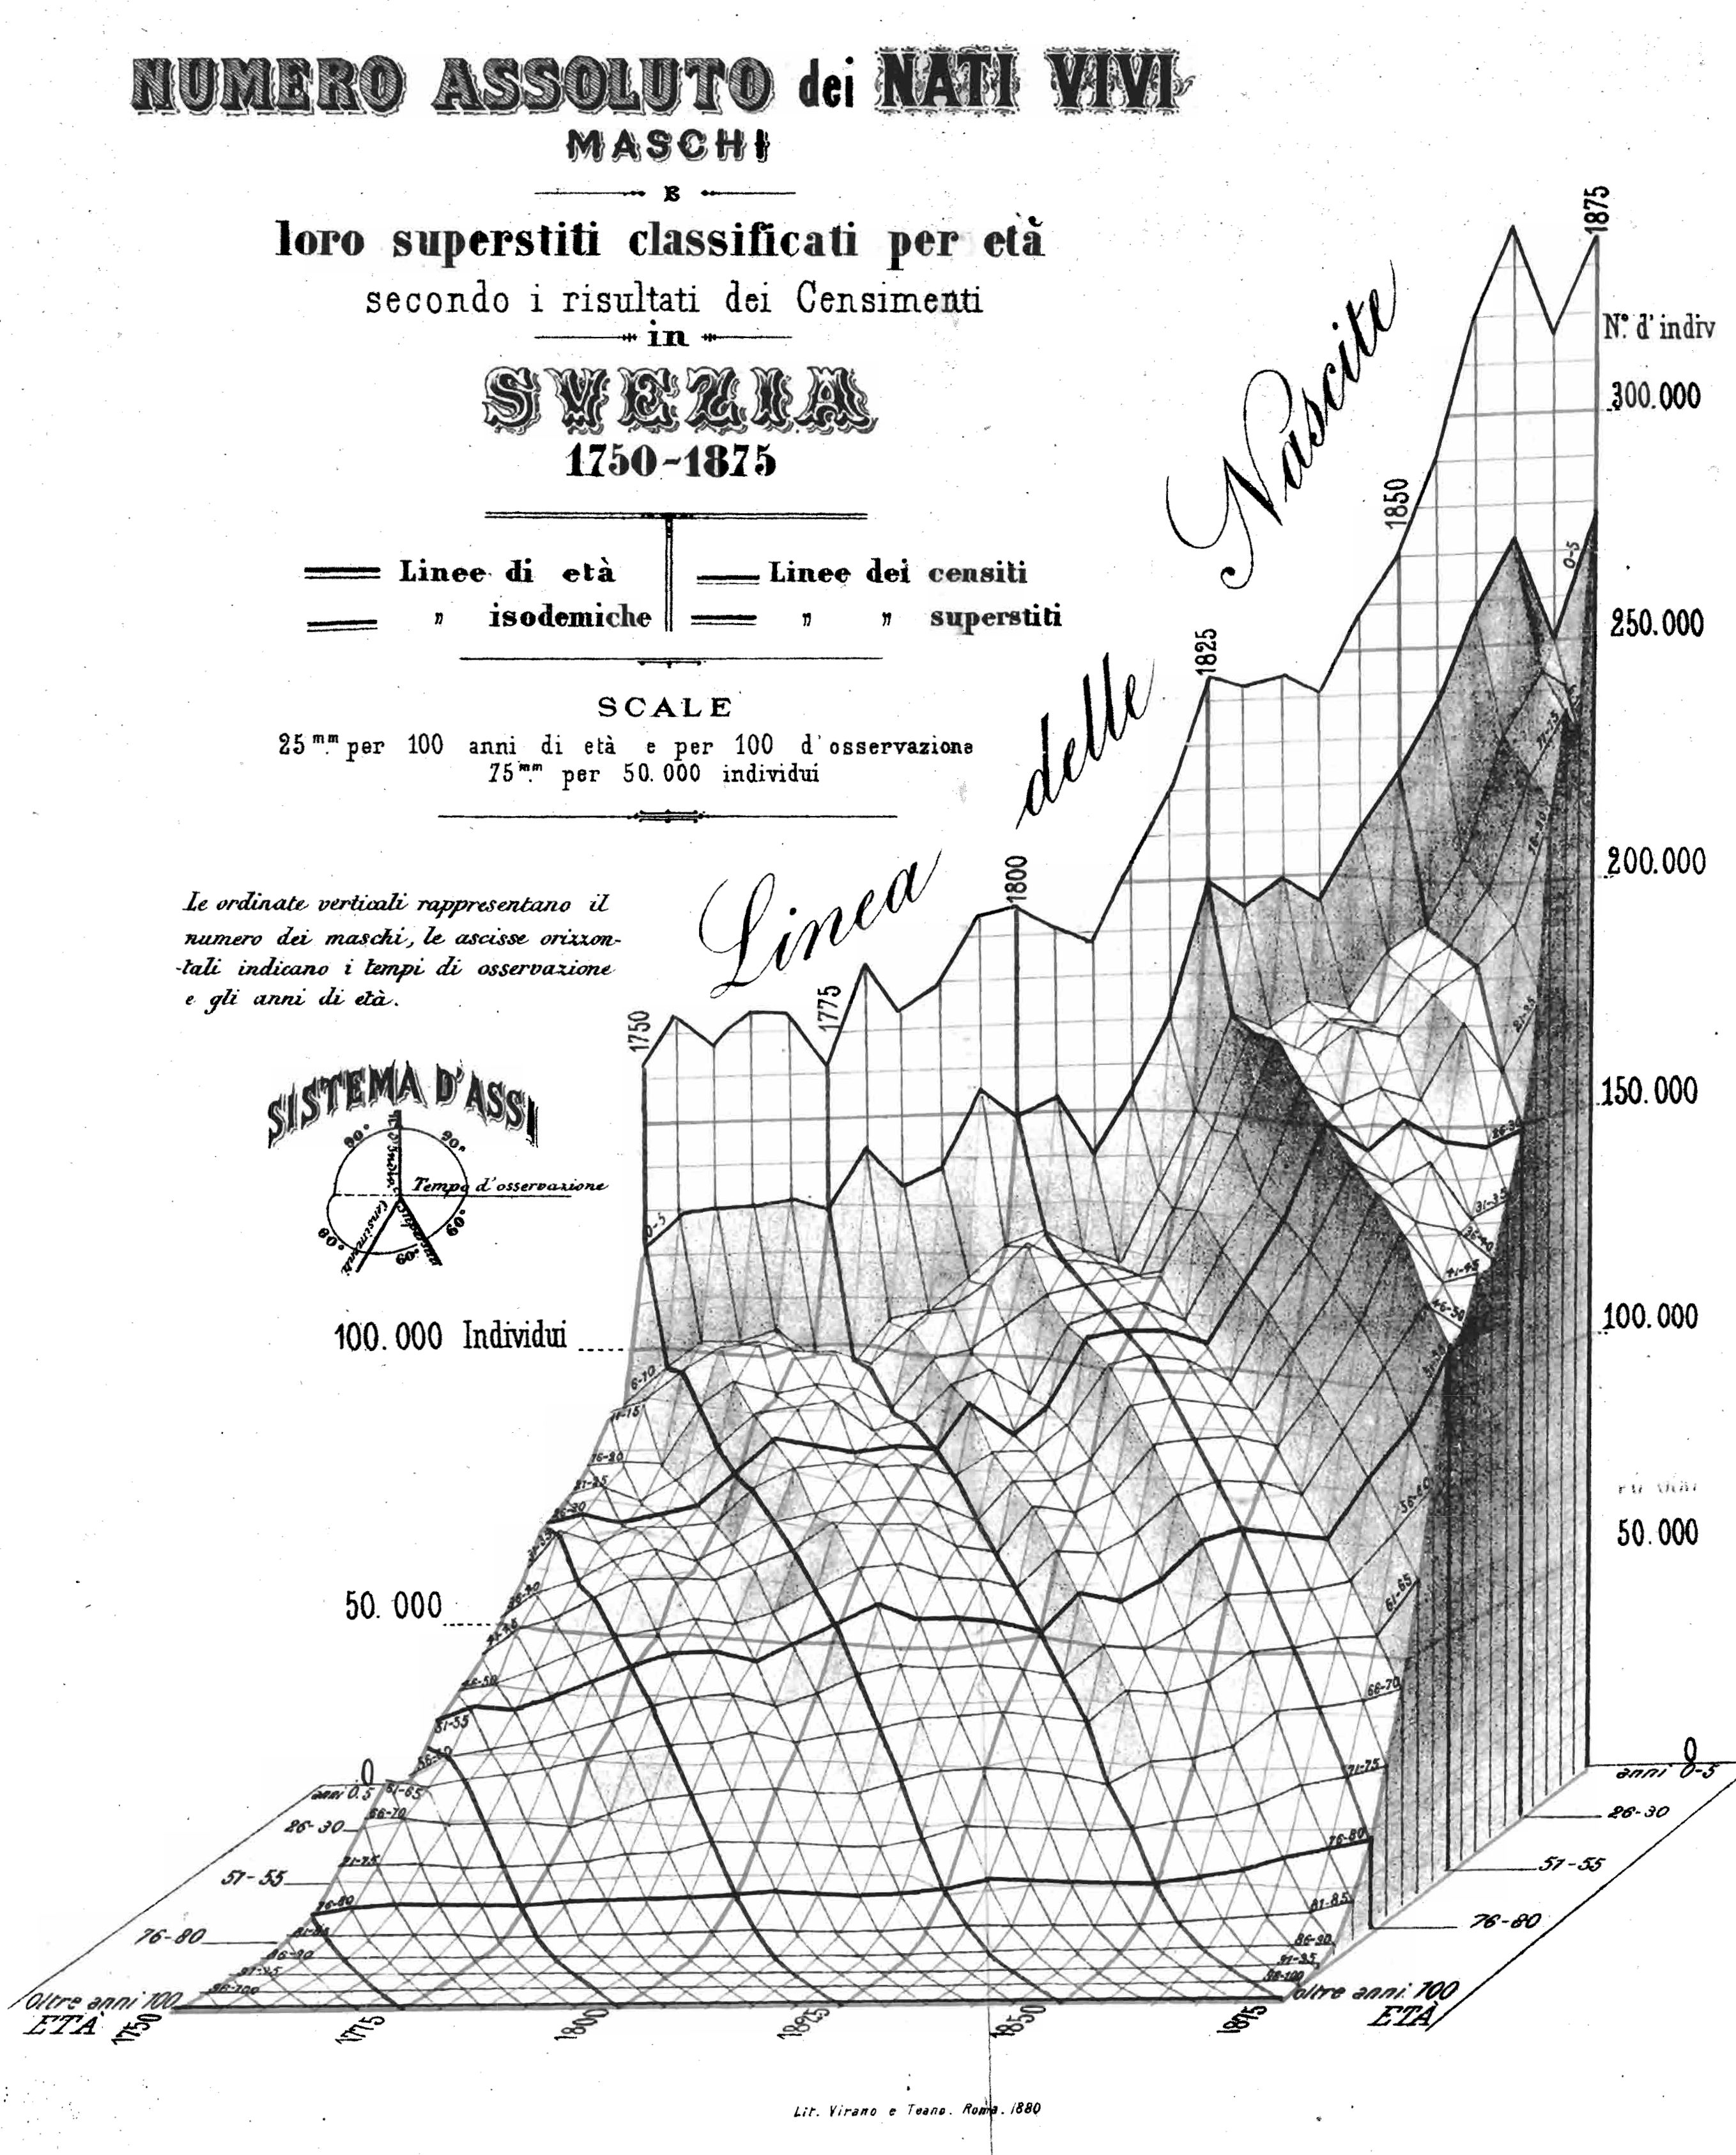 3D population pyramid: Luigi Perozzo showed the age distributions of the population of Sweden from 1750 to 1875 as a three-dimensional surface.